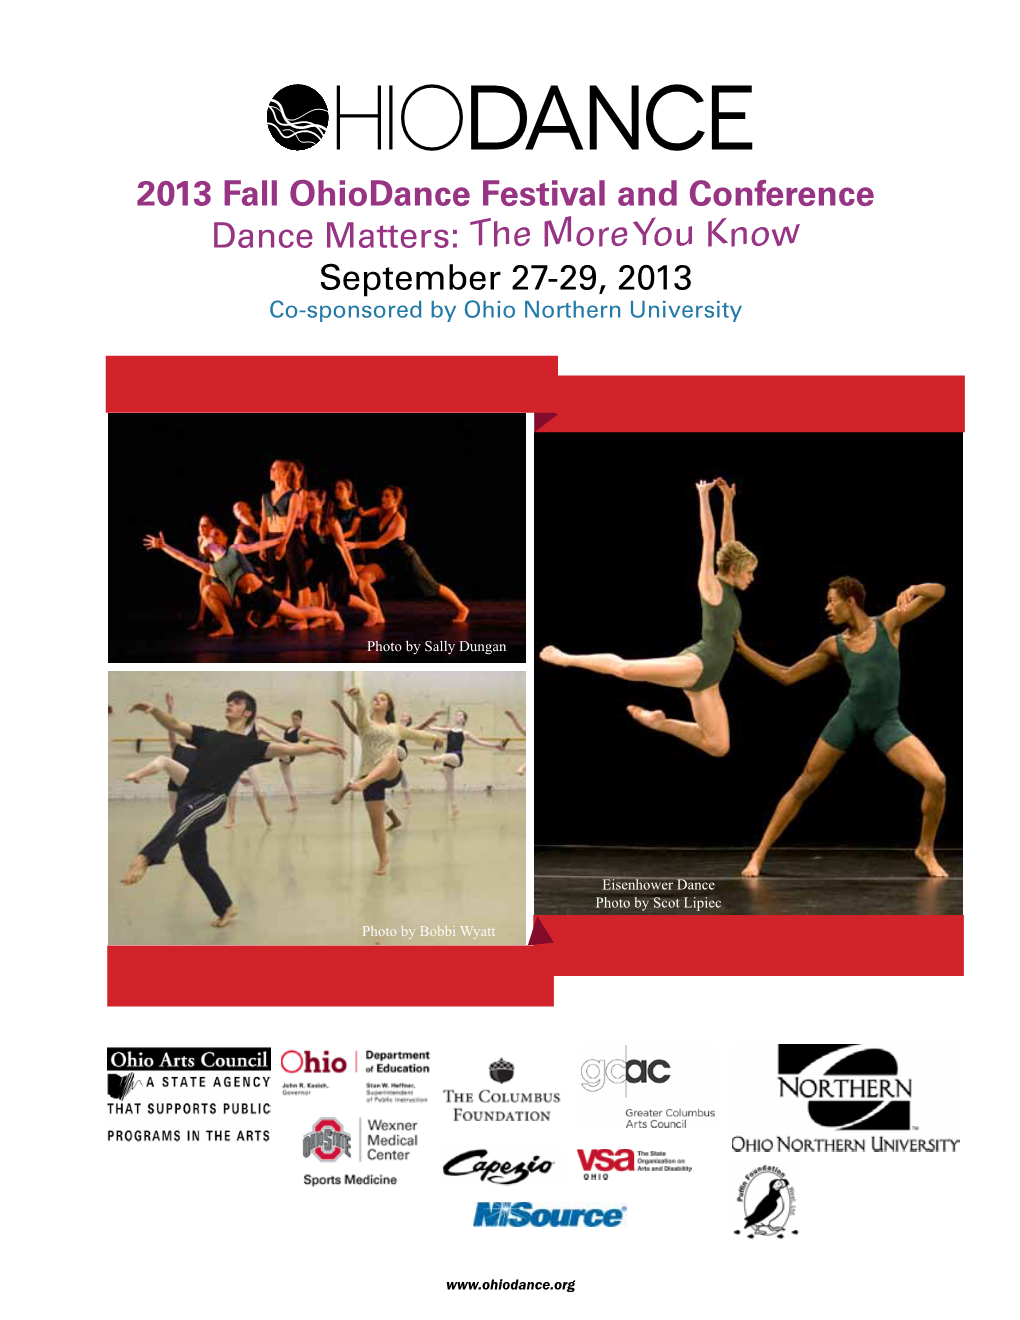 2013 Fall Ohiodance Festival and Conference Dance Matters: the More You Know September 27-29, 2013 Co-Sponsored by Ohio Northern University